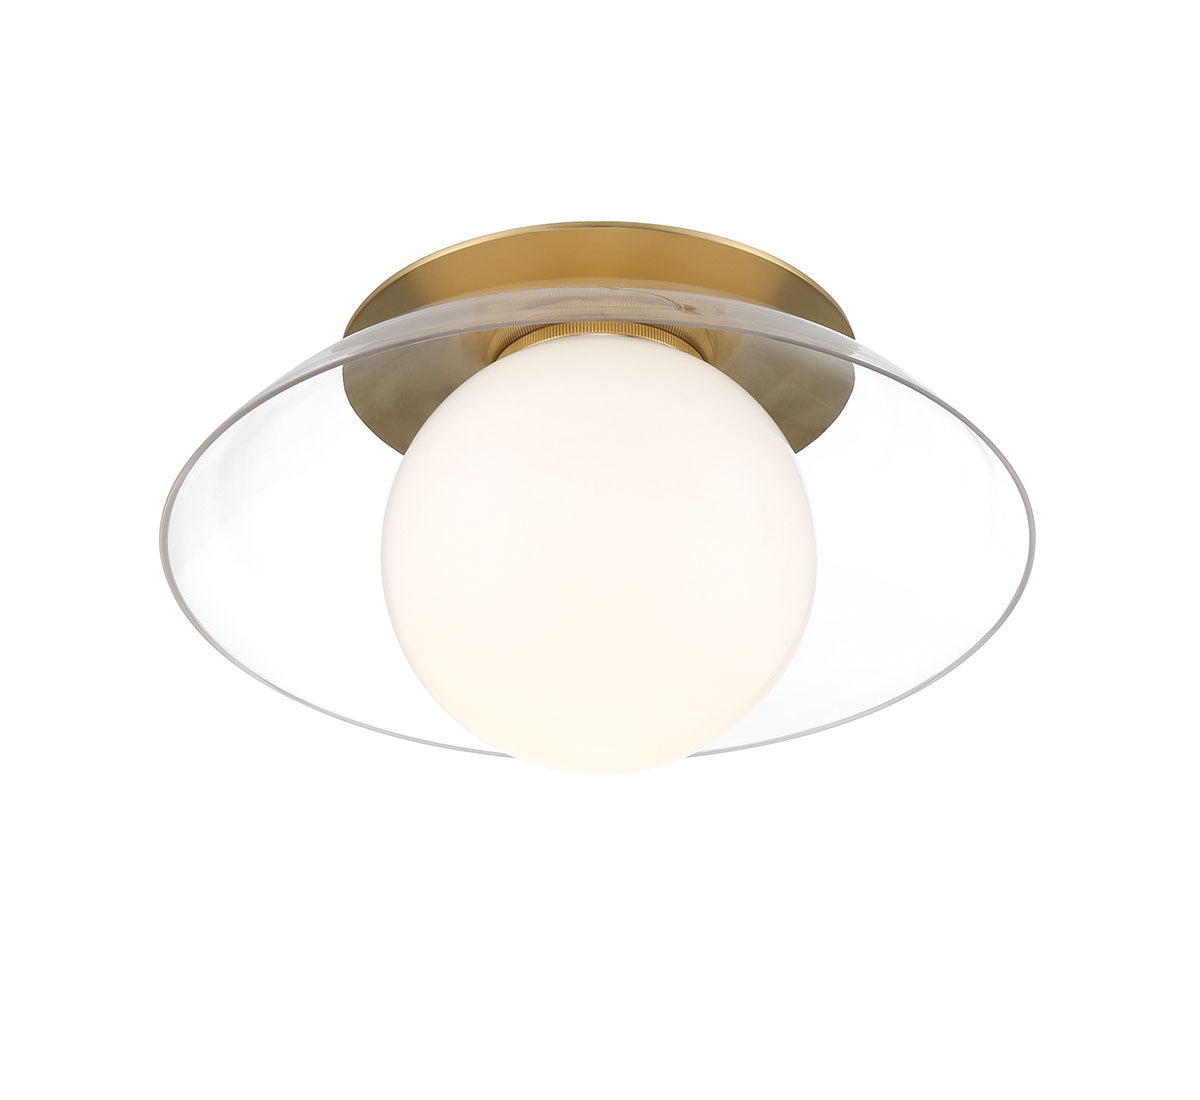 ANCONA 10125-05, Small 1 Light Ceiling / Wall Mount